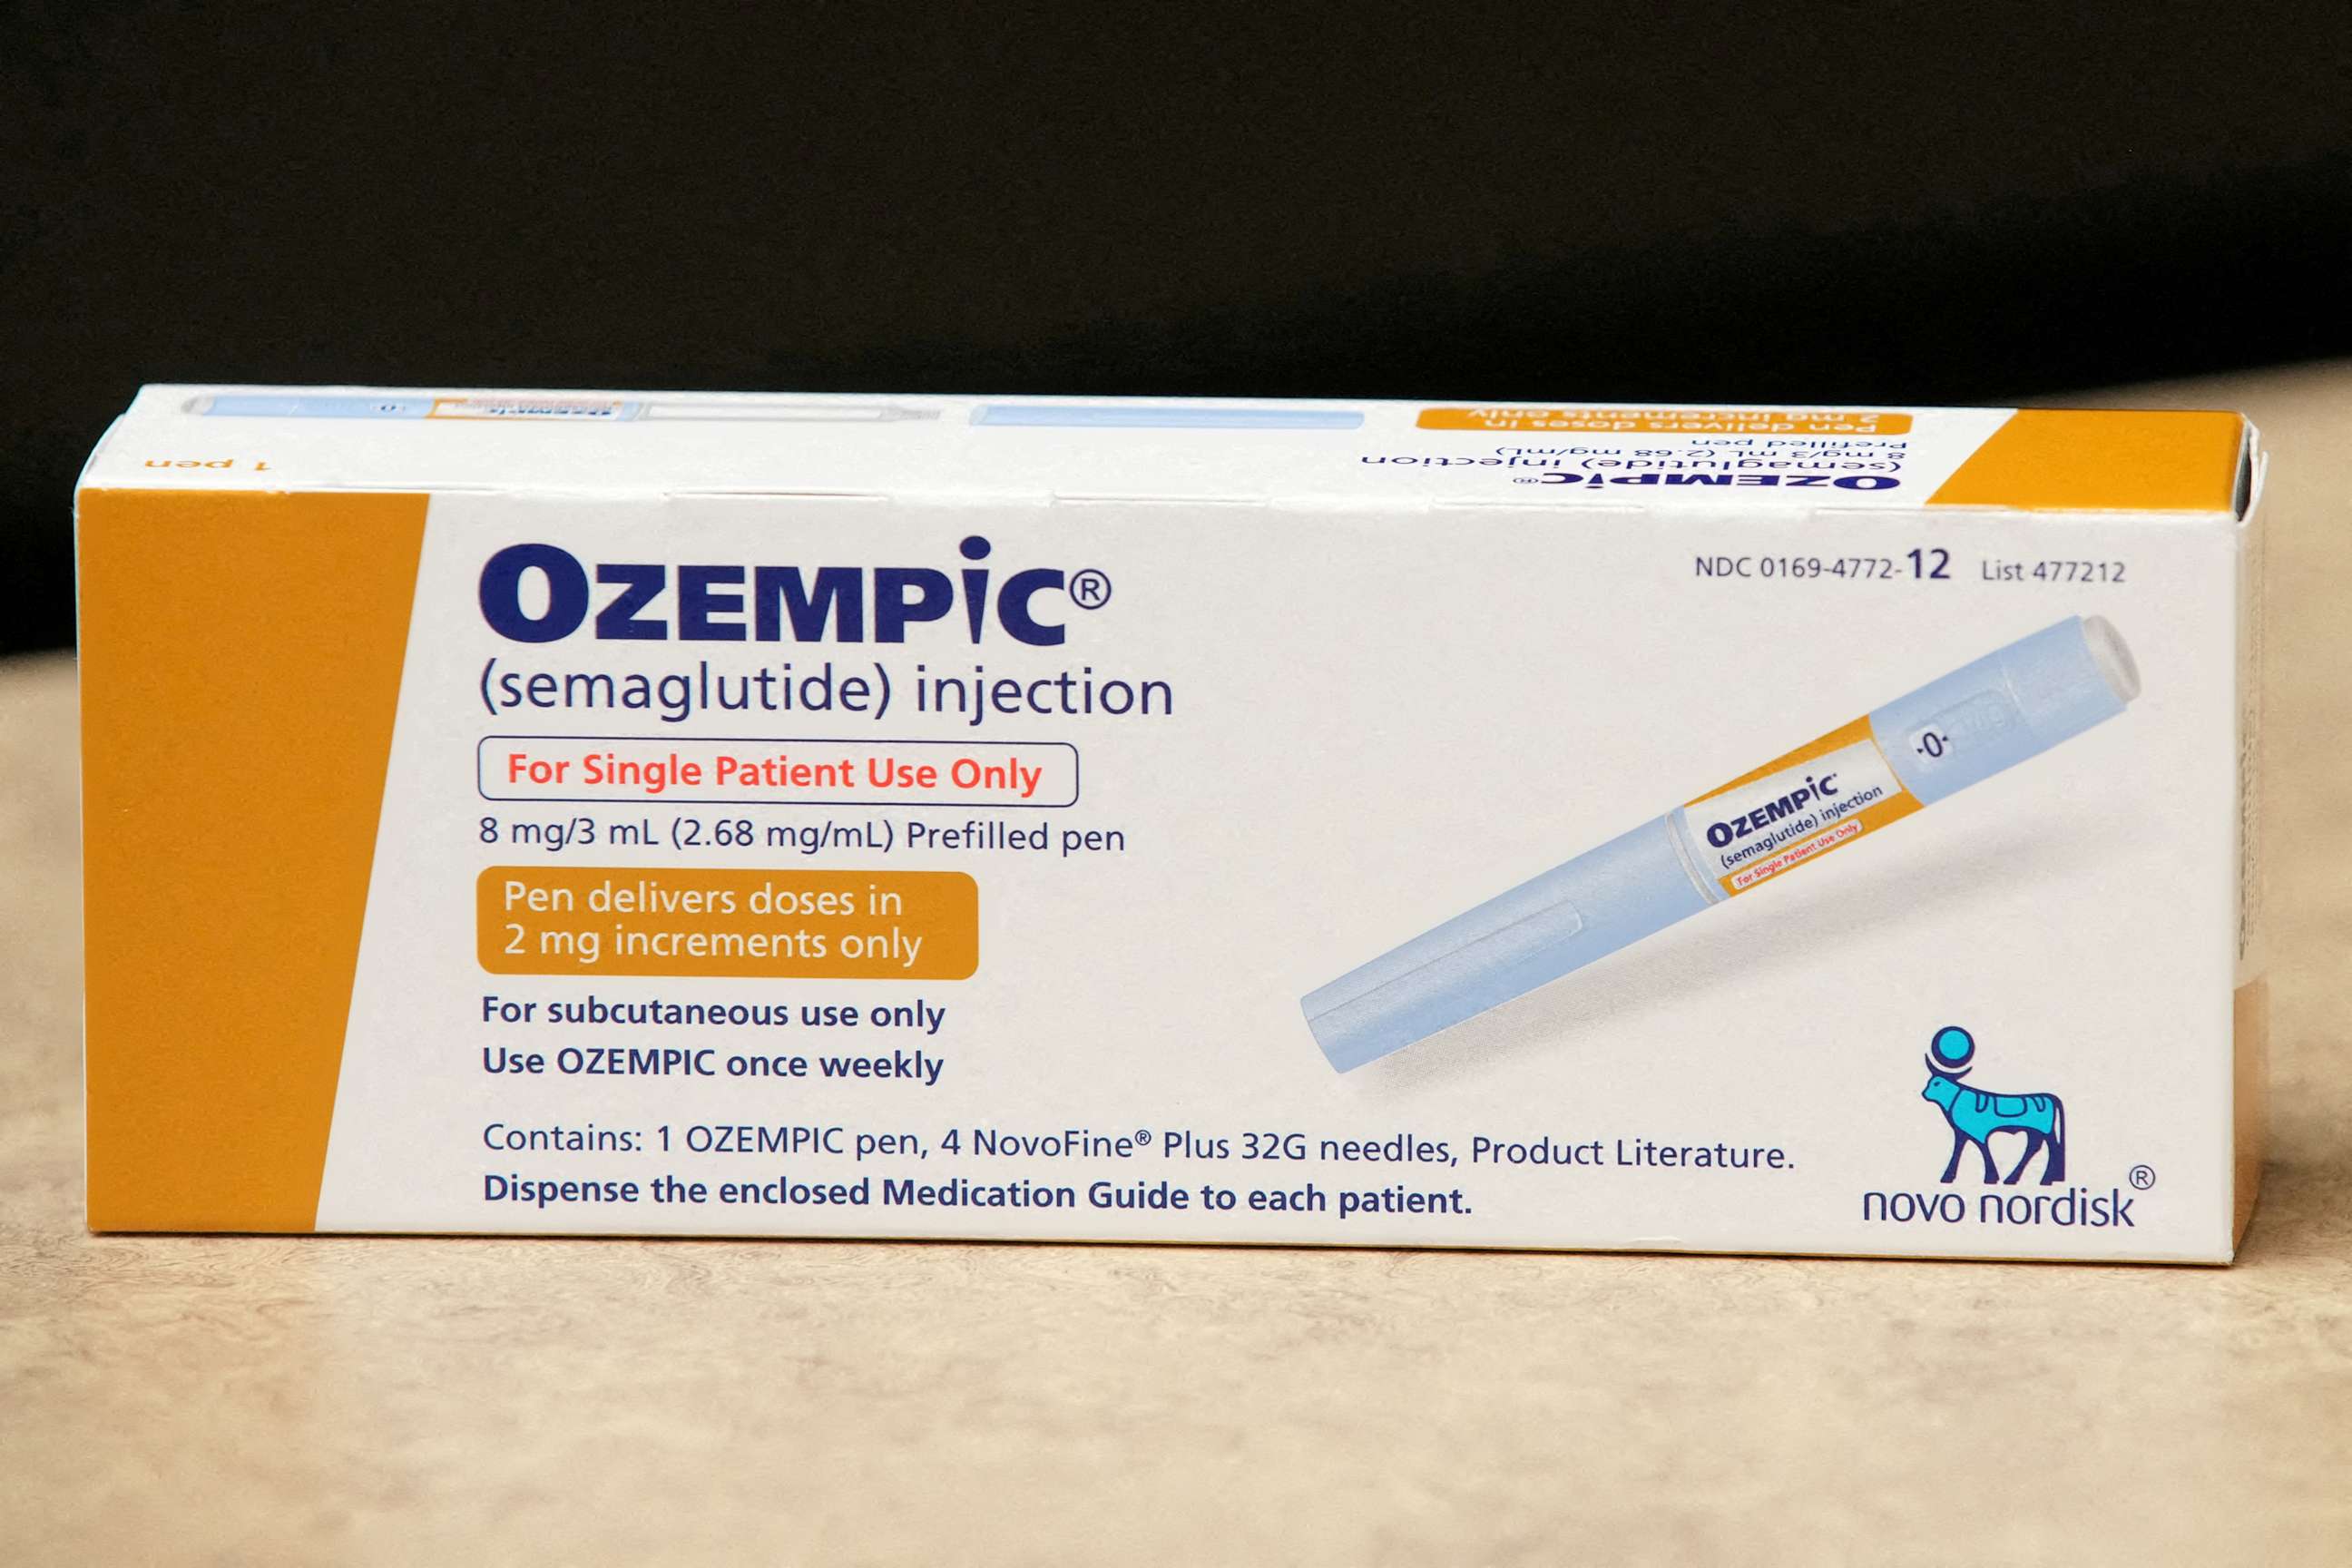 PHOTO: A box of Ozempic, a semaglutide injection drug used for treating type 2 diabetes and made by Novo Nordisk, is seen at a Rock Canyon Pharmacy in Provo, Utah, March 29, 2023.